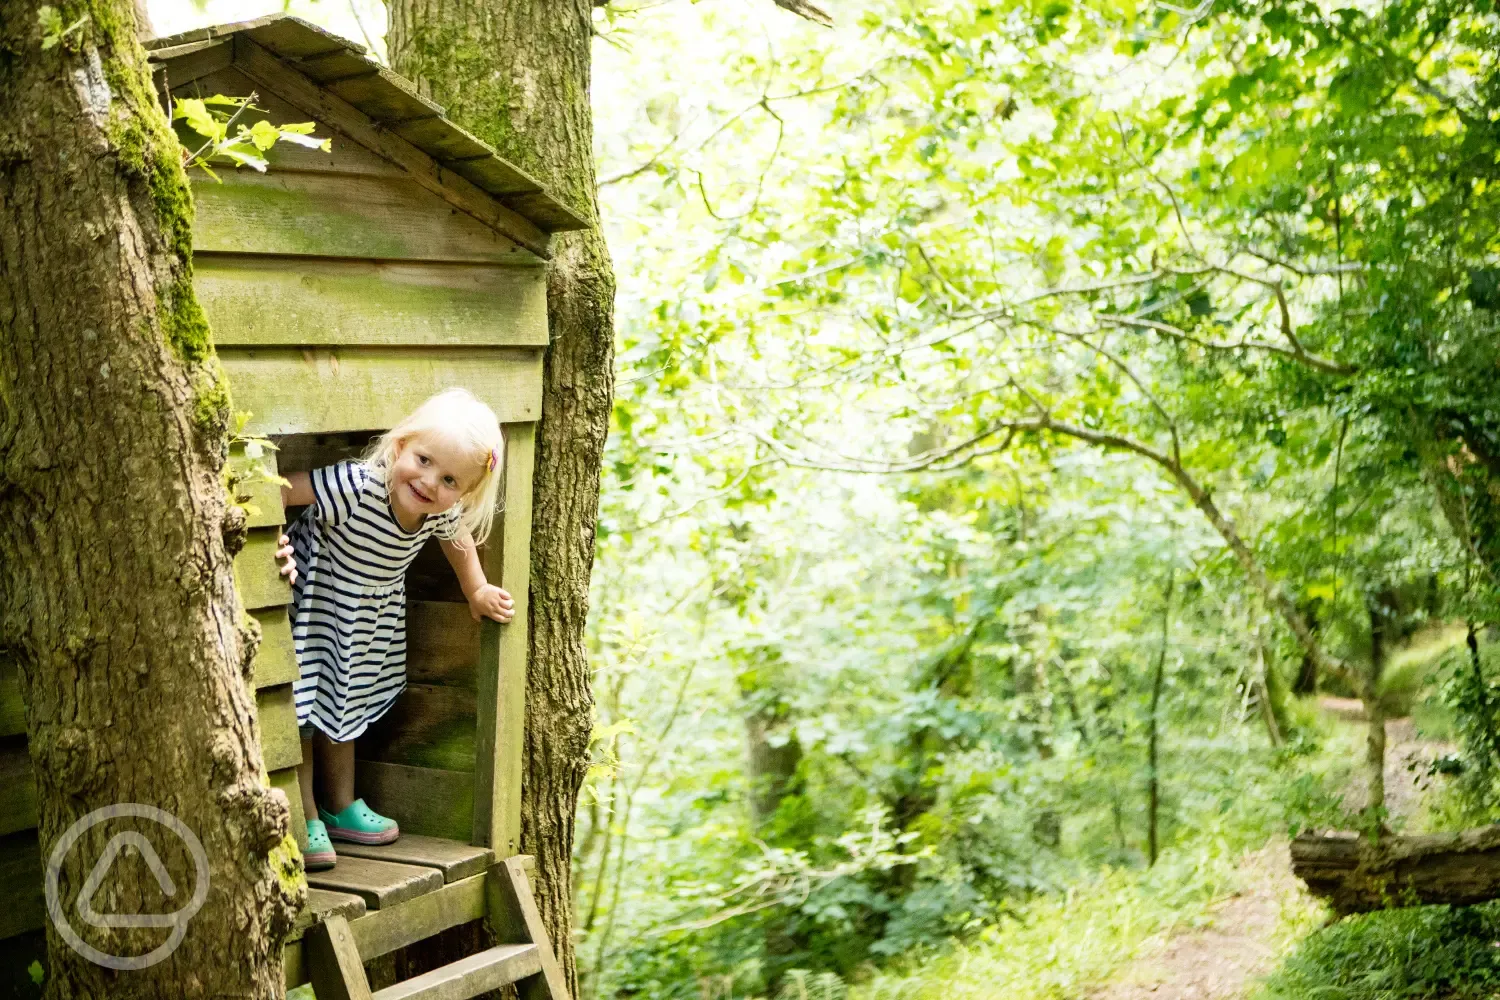 Woodland for kids to explore